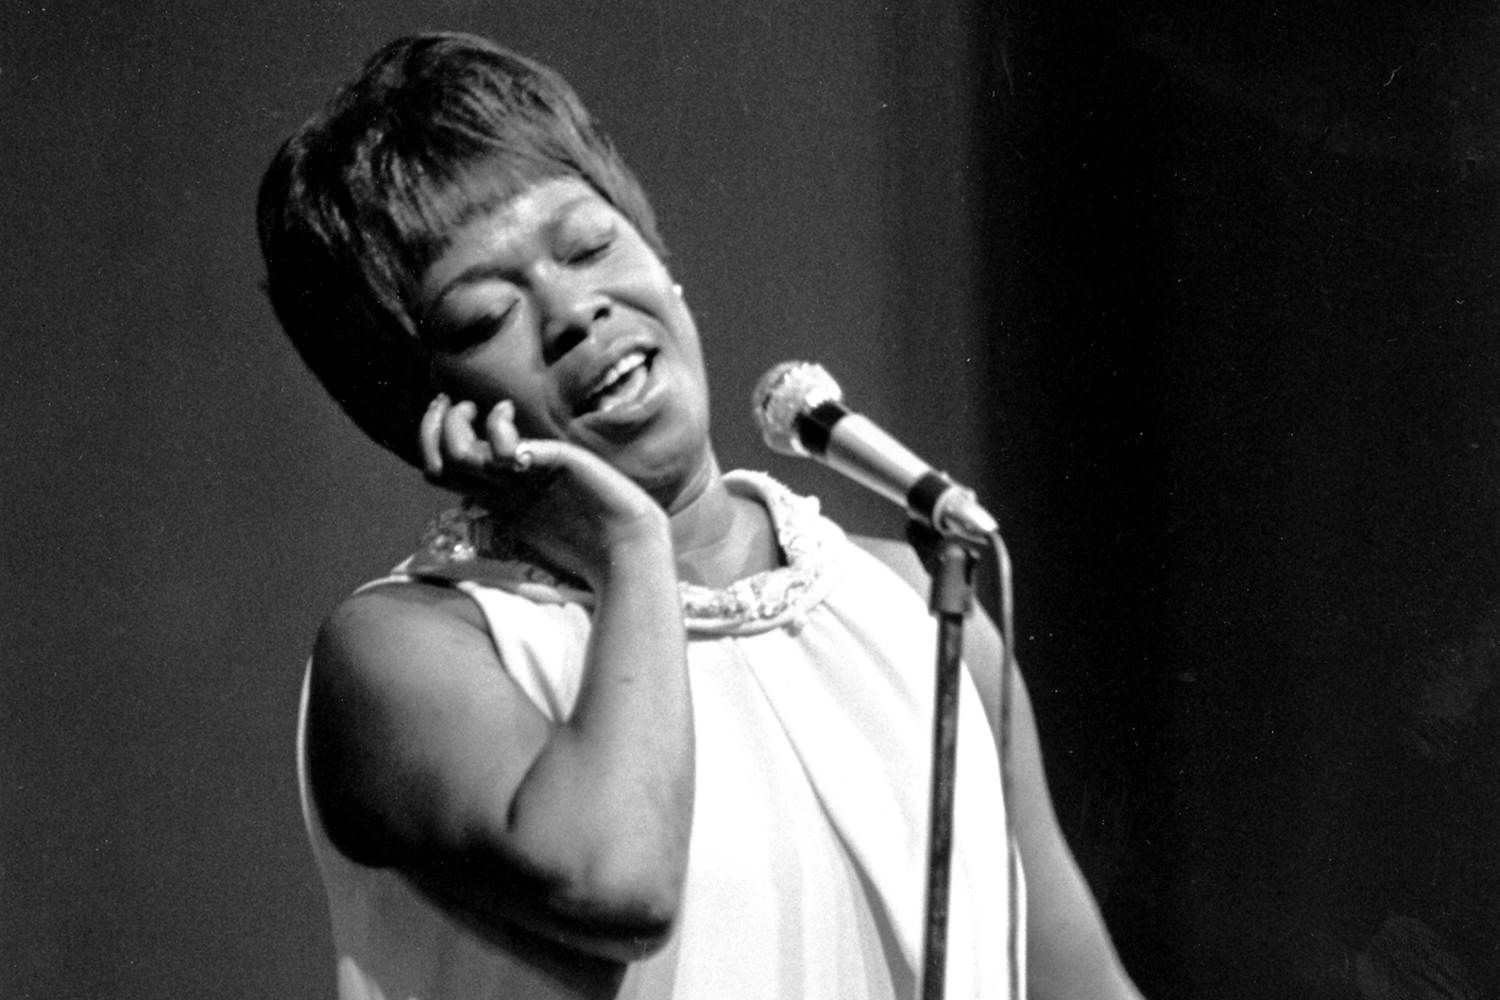 Vocalist Sarah Vaughan sings at the Newport Jazz Festival's closing night on July 3, 1967 in Newport, R.I. (AP Photo)